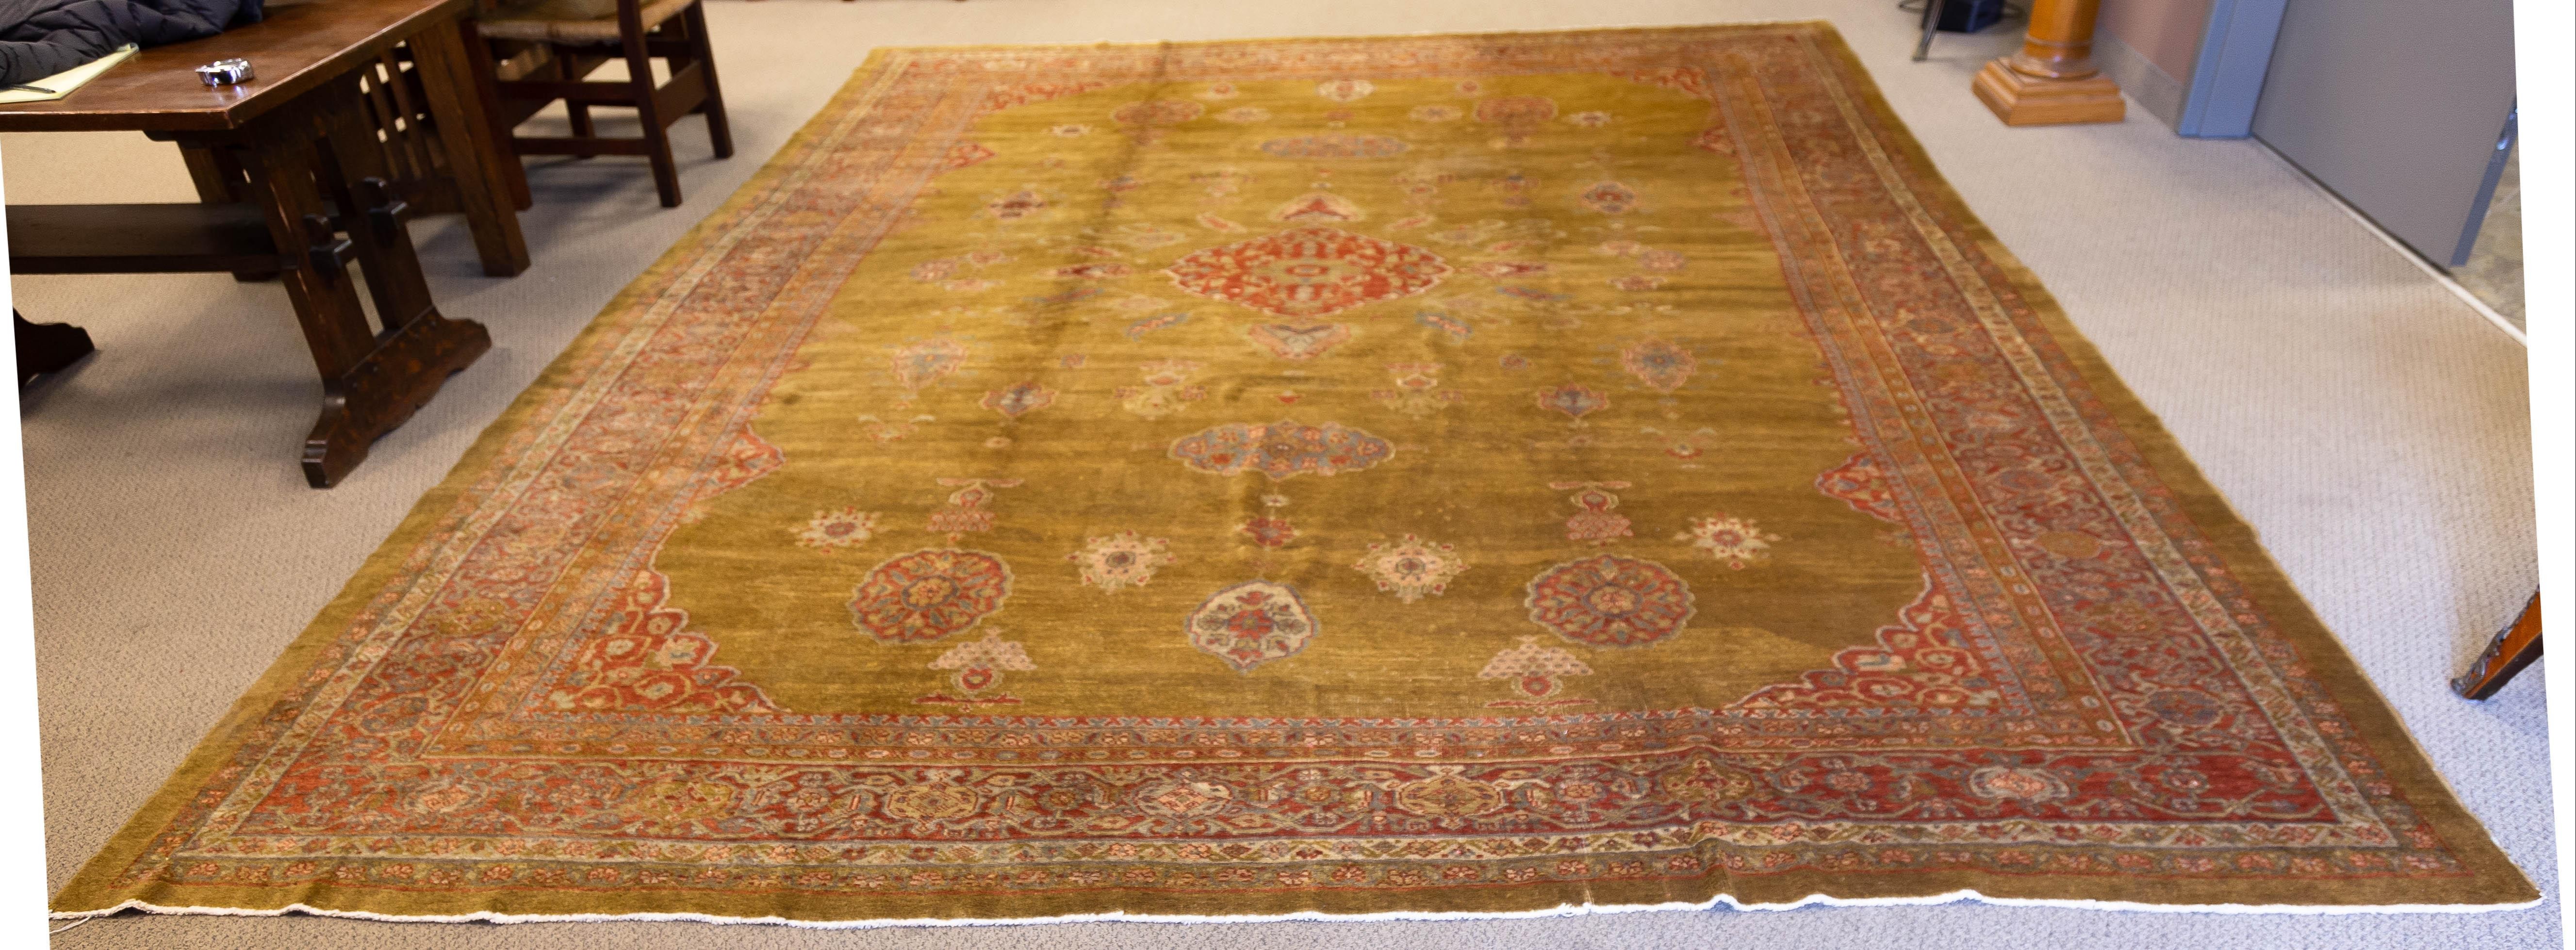 SULTANABAD ORIENTAL RUG Early 20th 3529bb